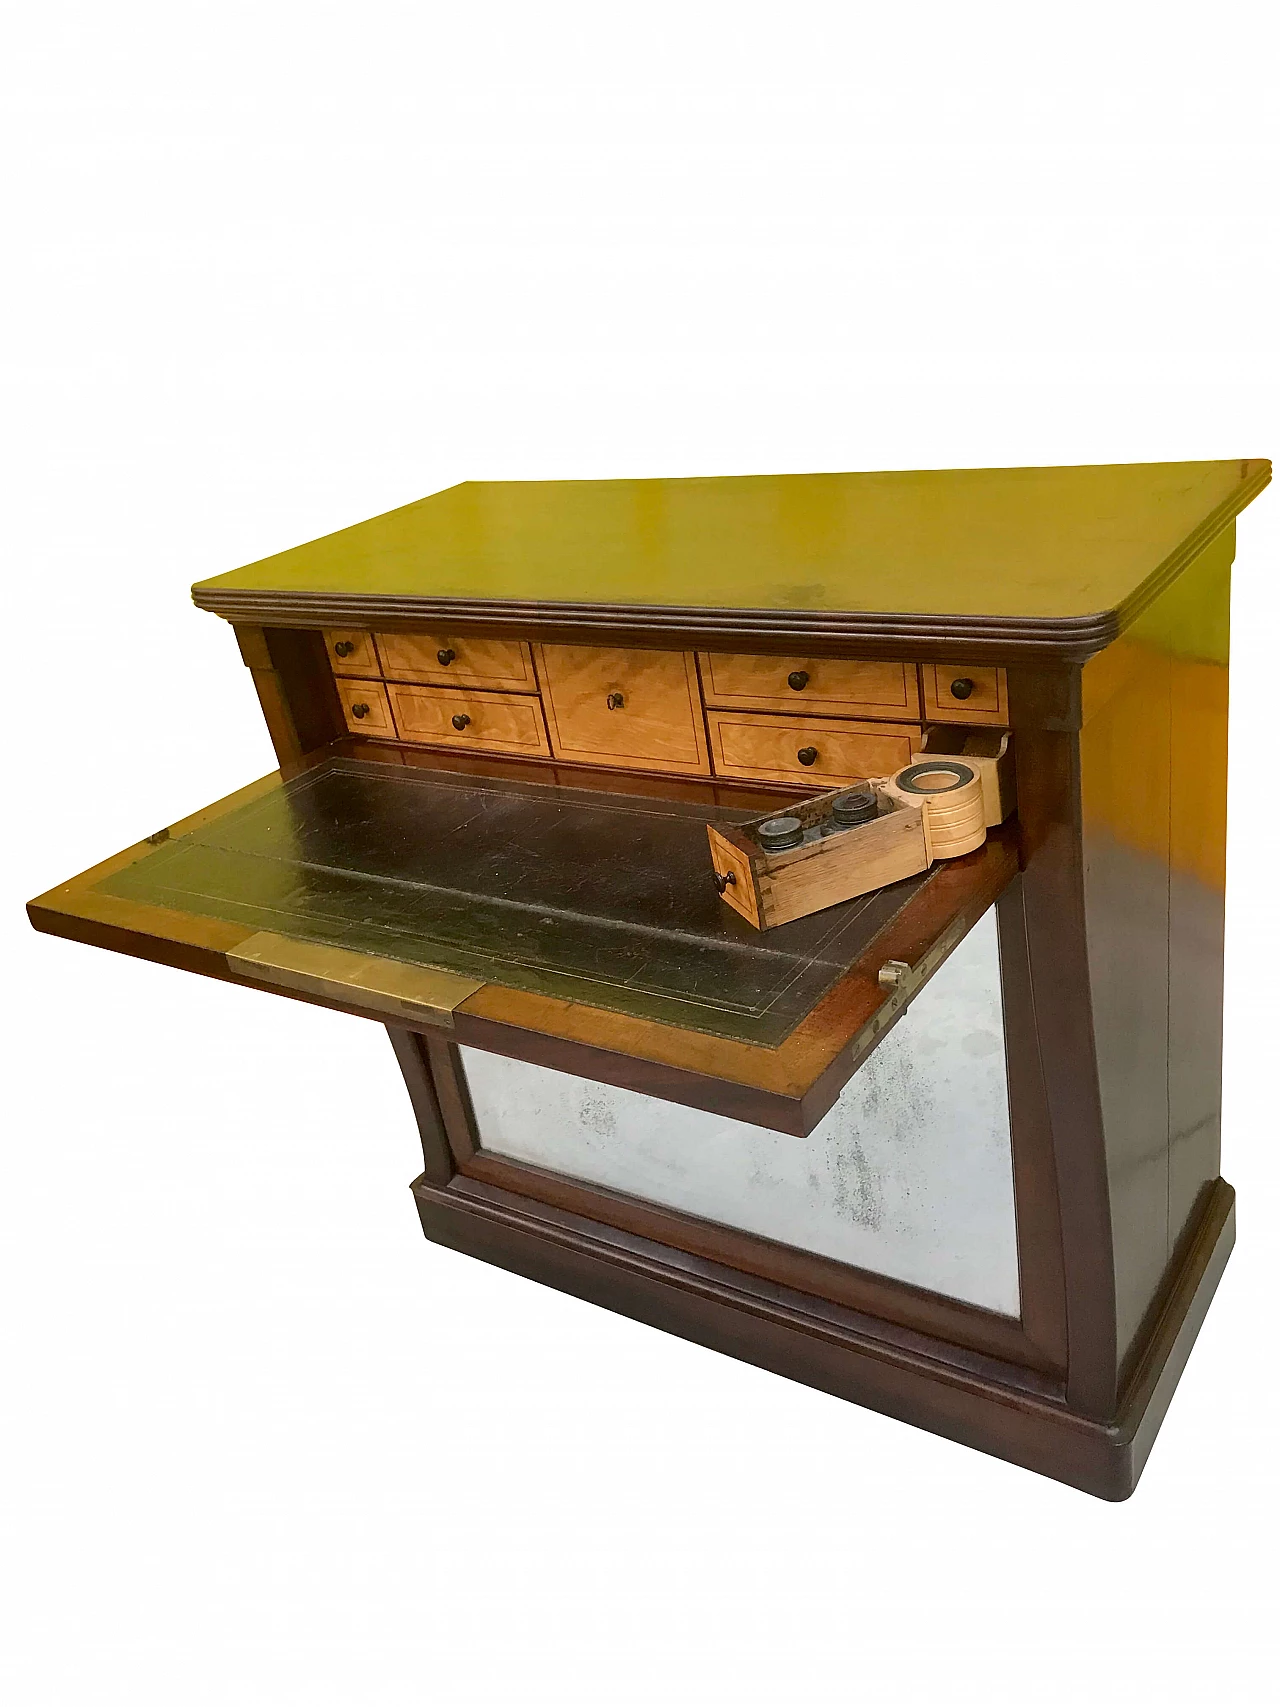 Charle X mahogany credenza console secretaire with mirror, drawers and ink stand, 19th century 1165304